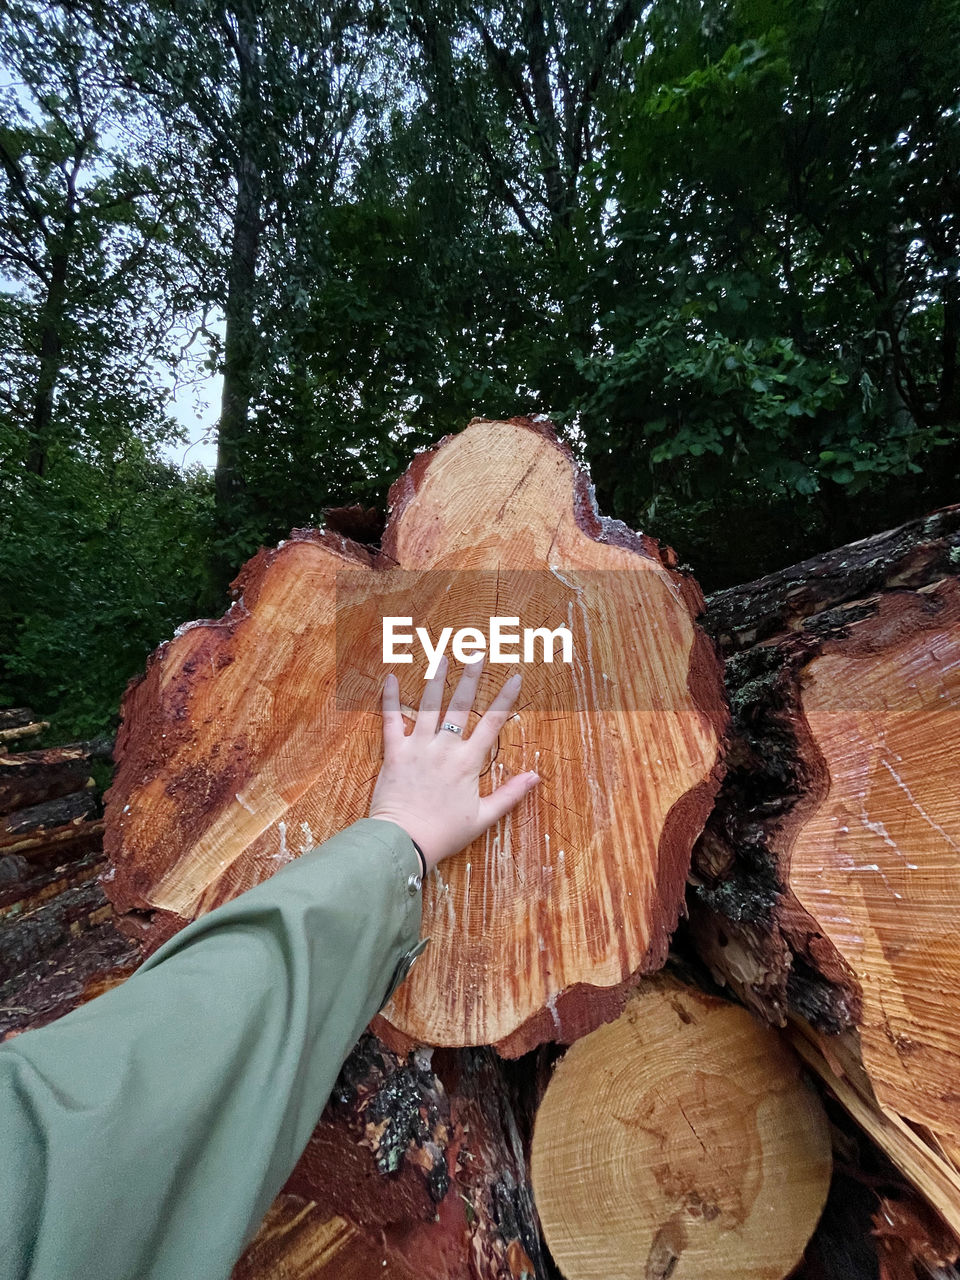 tree, wood, plant, forest, log, timber, one person, nature, deforestation, day, firewood, leisure activity, lumber industry, leaf, hand, lifestyles, land, trunk, outdoors, logging, personal perspective, tree stump, bark, environmental issues, adult, tree trunk, woodland, autumn, rock